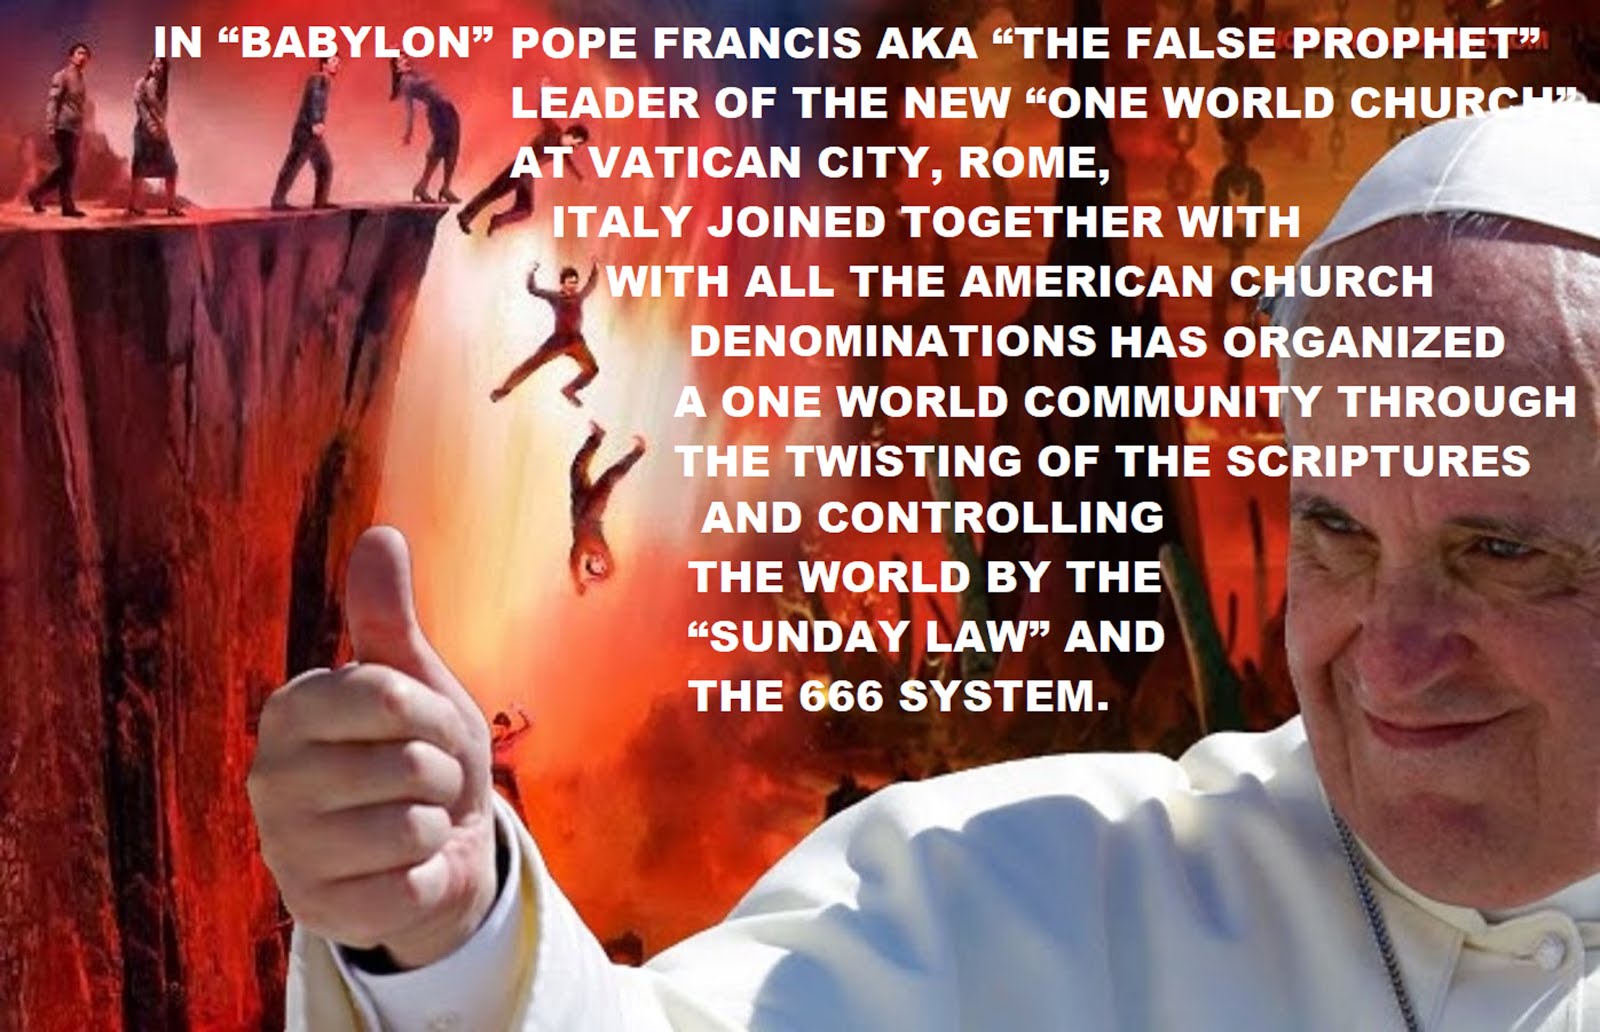 THE GREAT WHORE OF BABYLON, POPE FRANCIS,, THE VATICAN, THE ONE WORLD CHURCH AND THE NEW WORLD ORDE